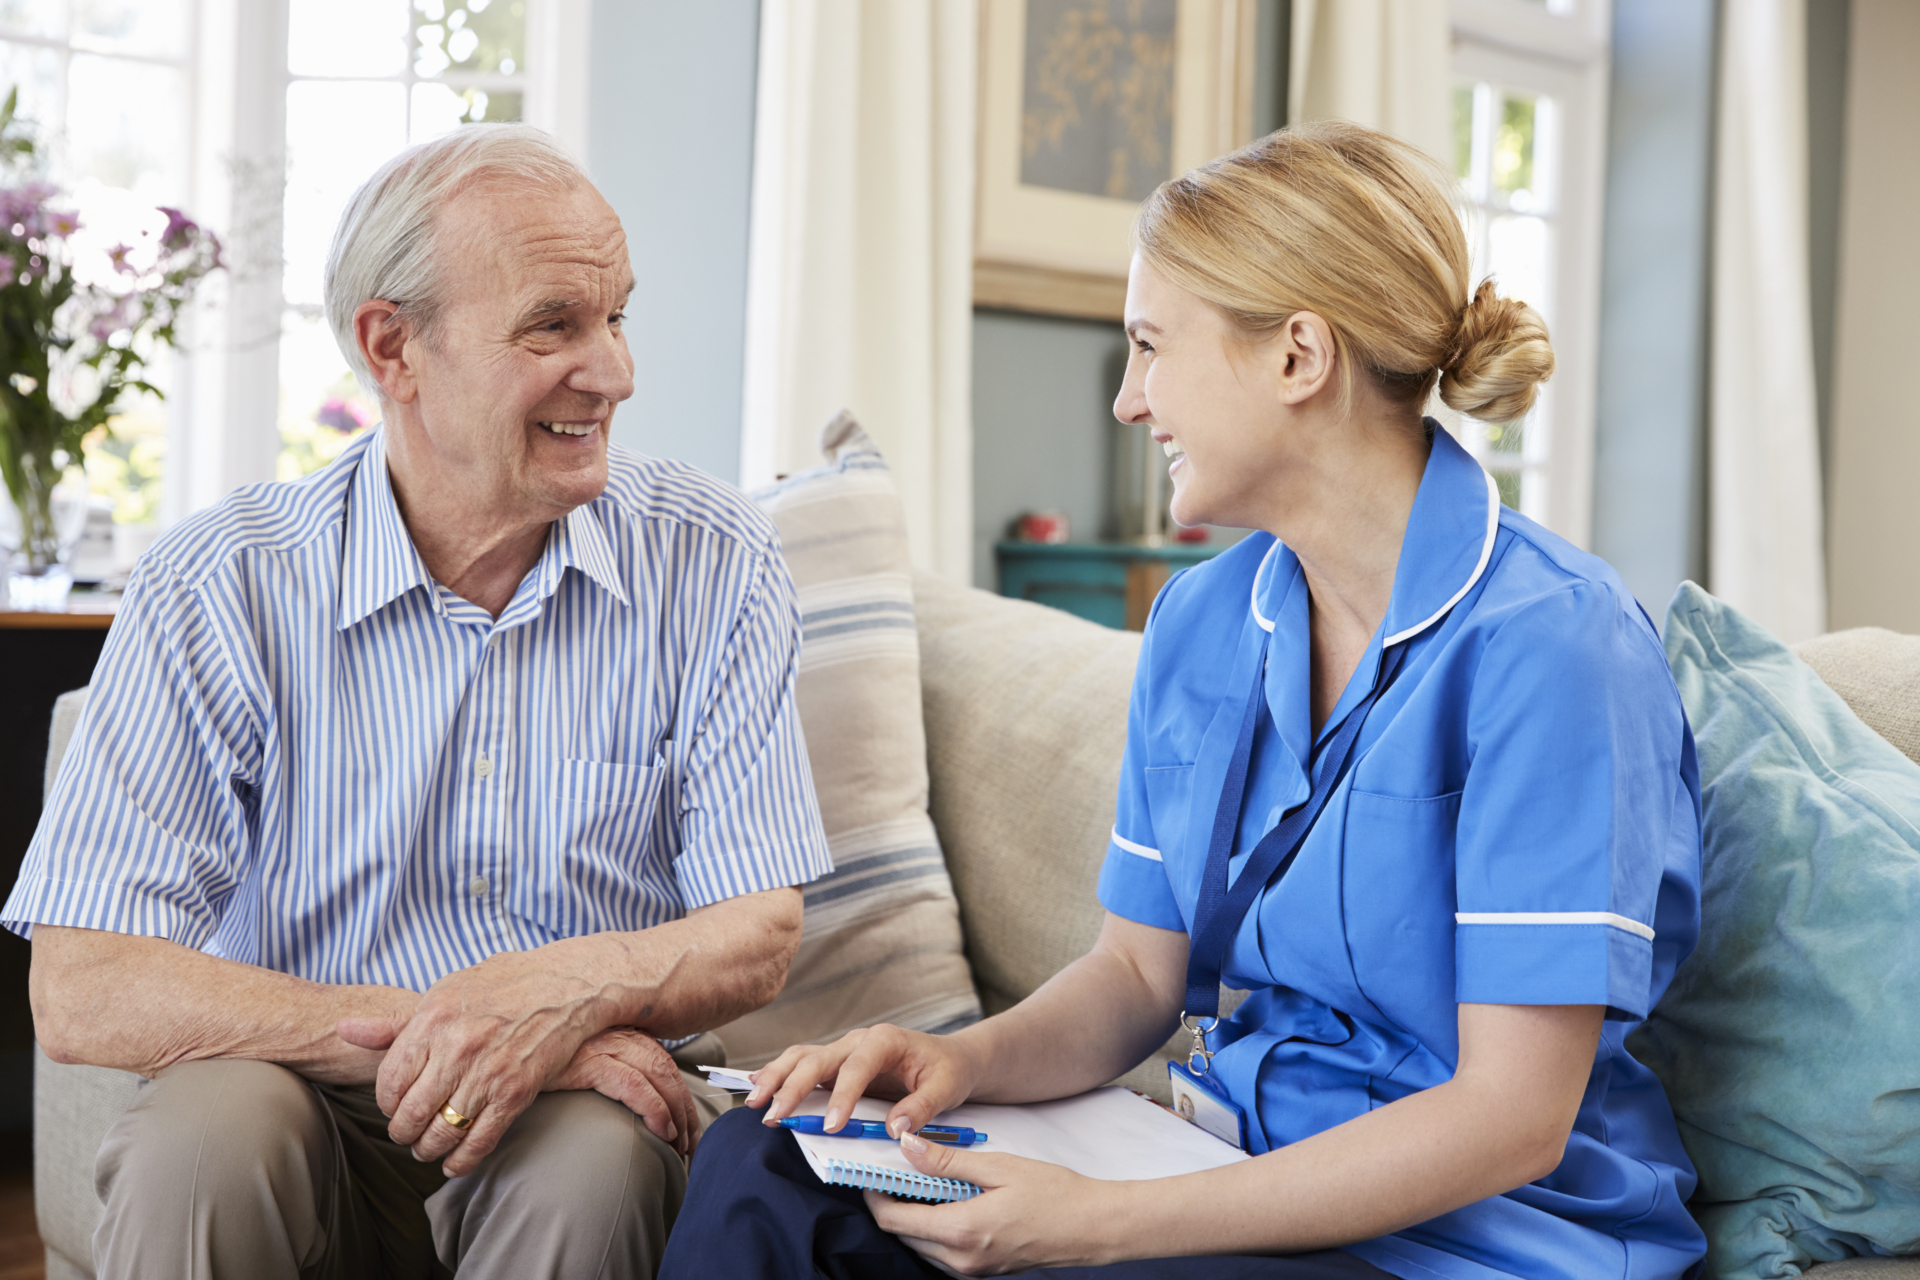 Tips To Choose The Best Home Care Service, Provider